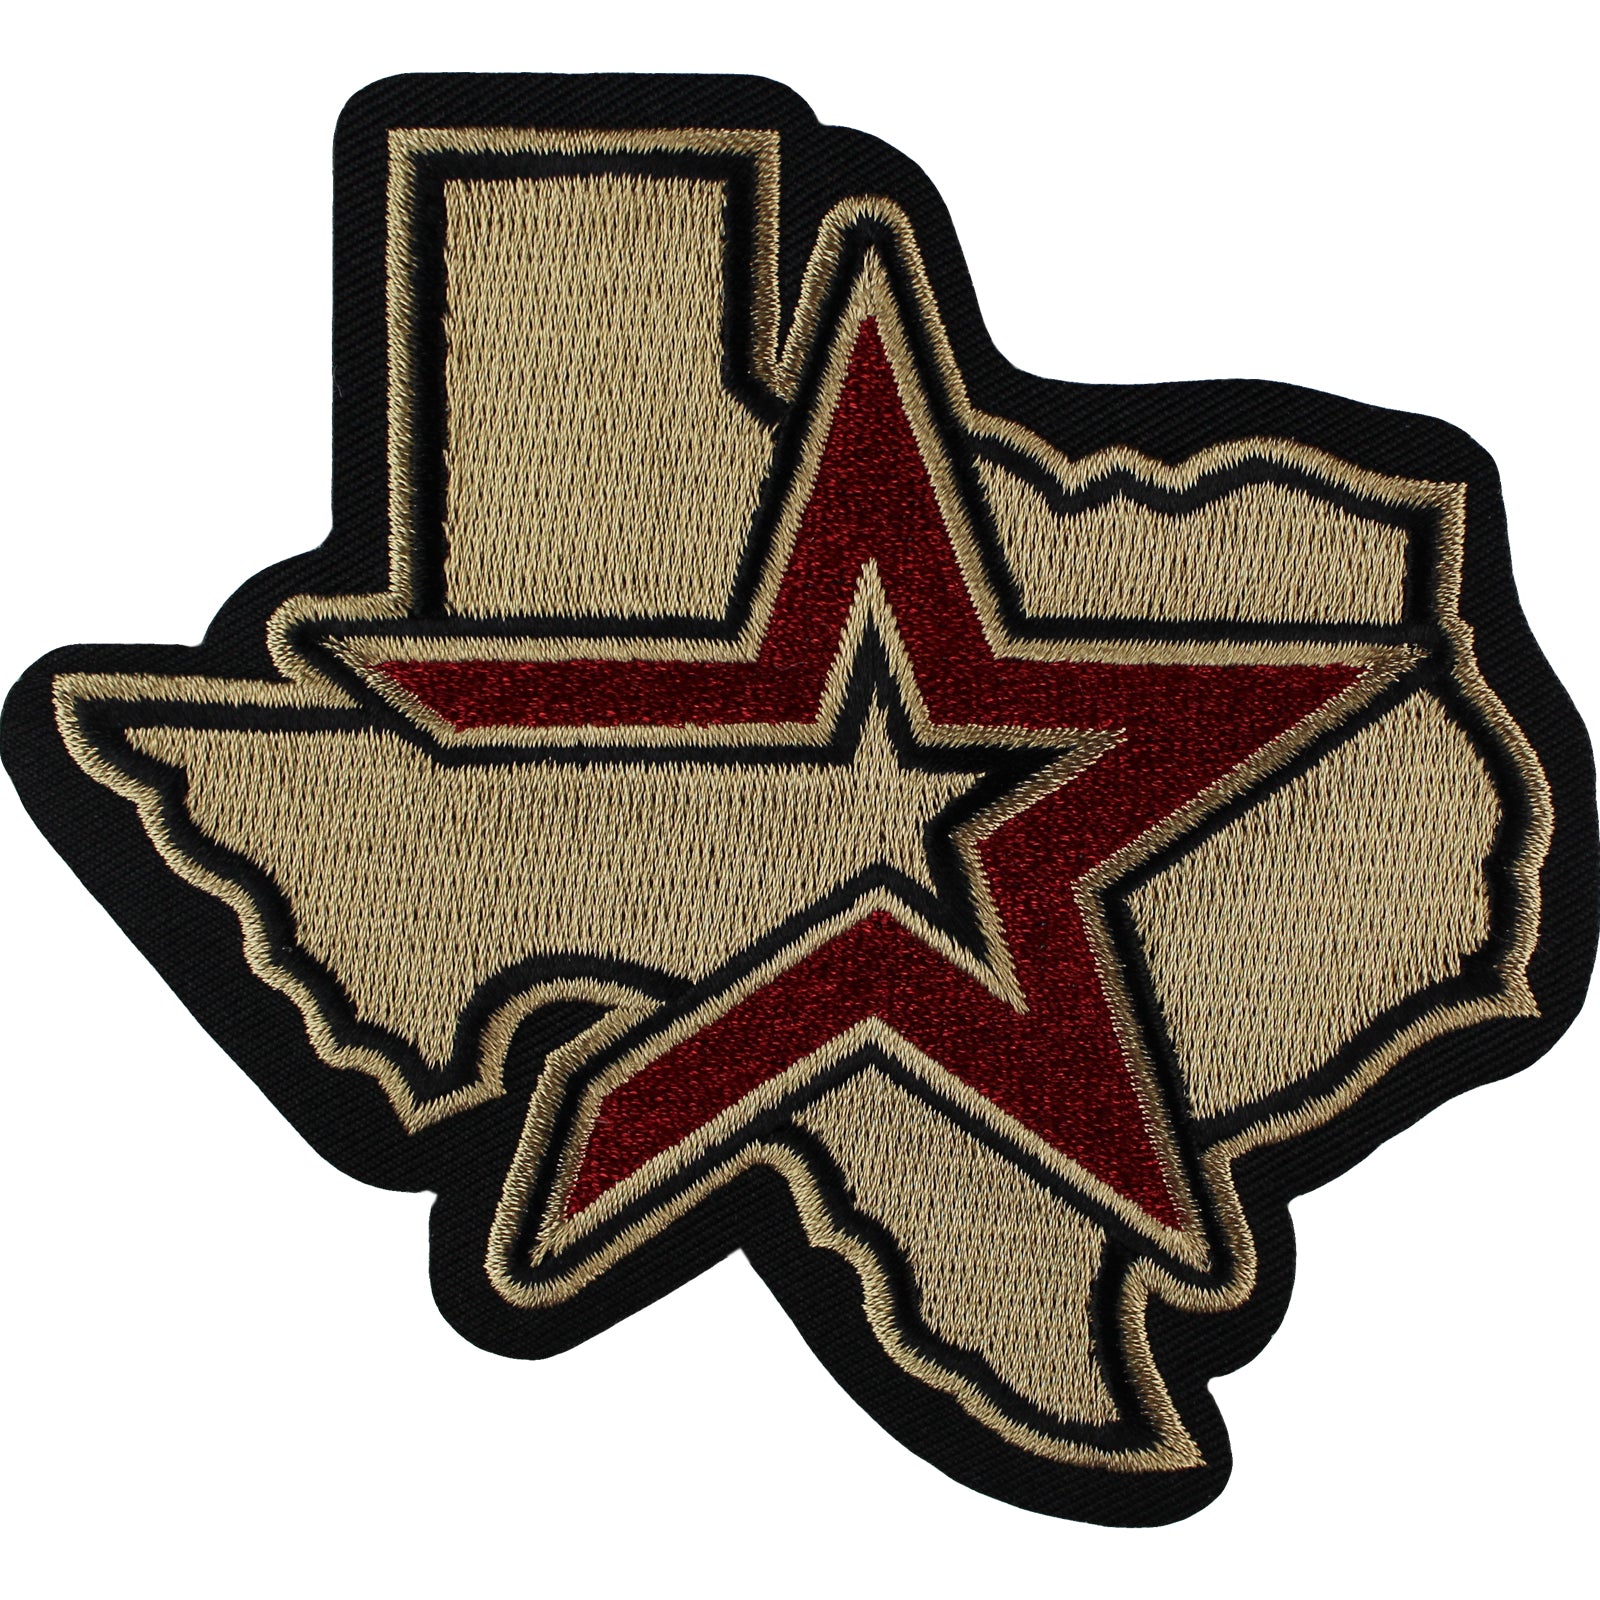 Houston Astros Home & Road Jersey Sleeve Patch Texas State (2000 - 2012)